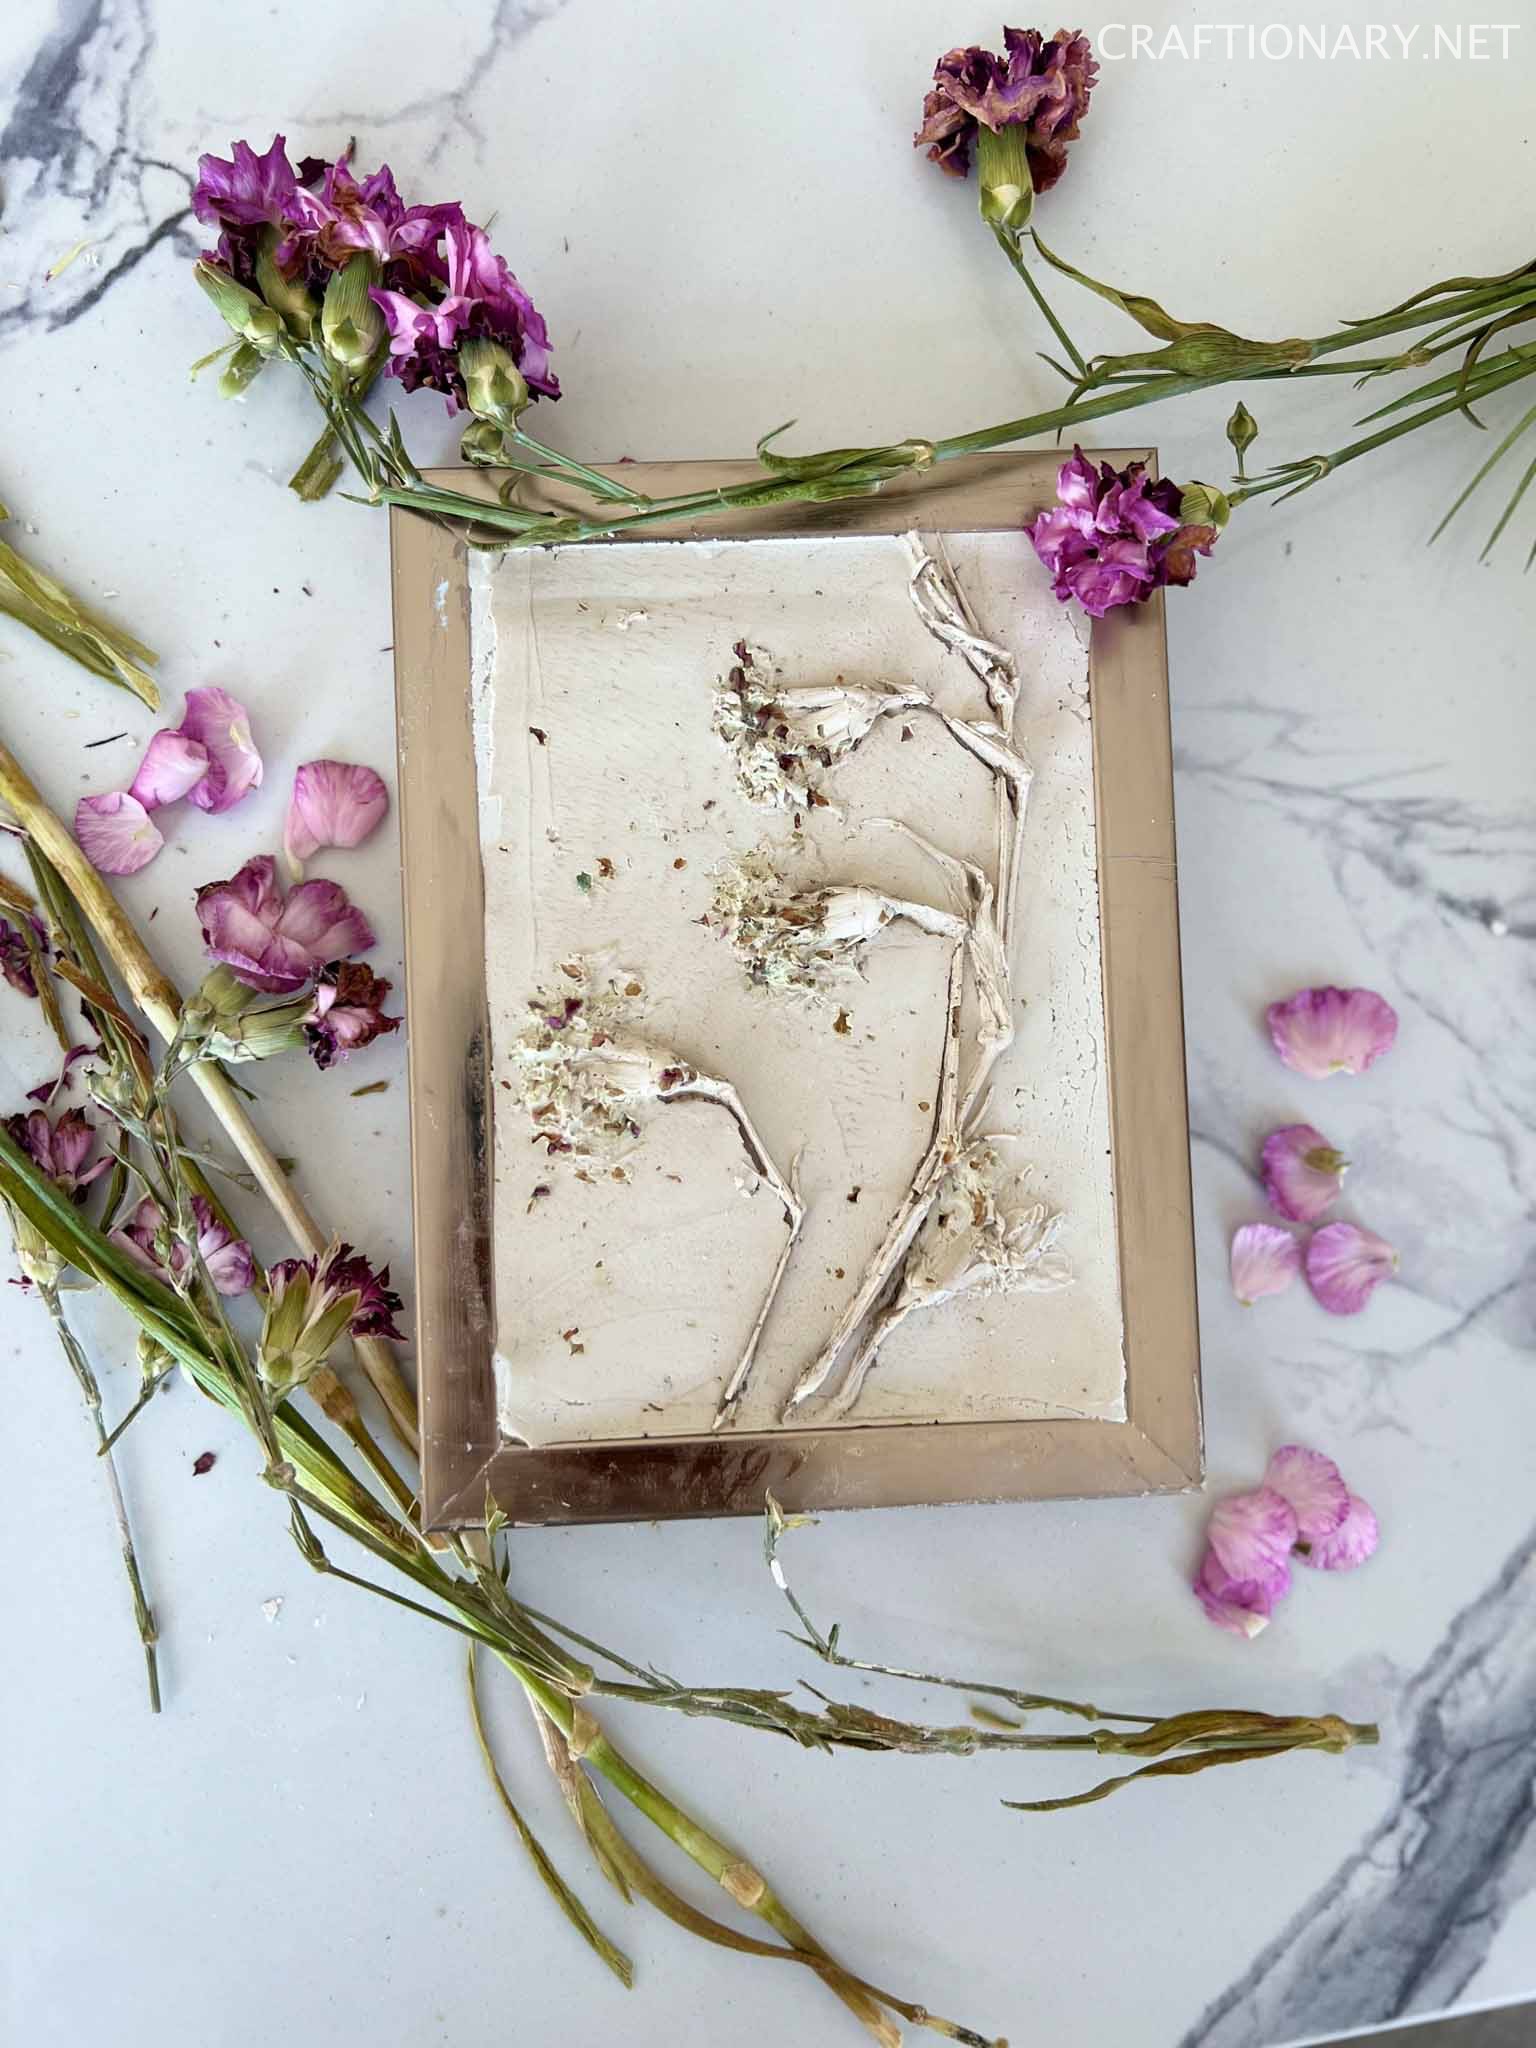 bas-relief dried botanicals casting art frame natural look expensive